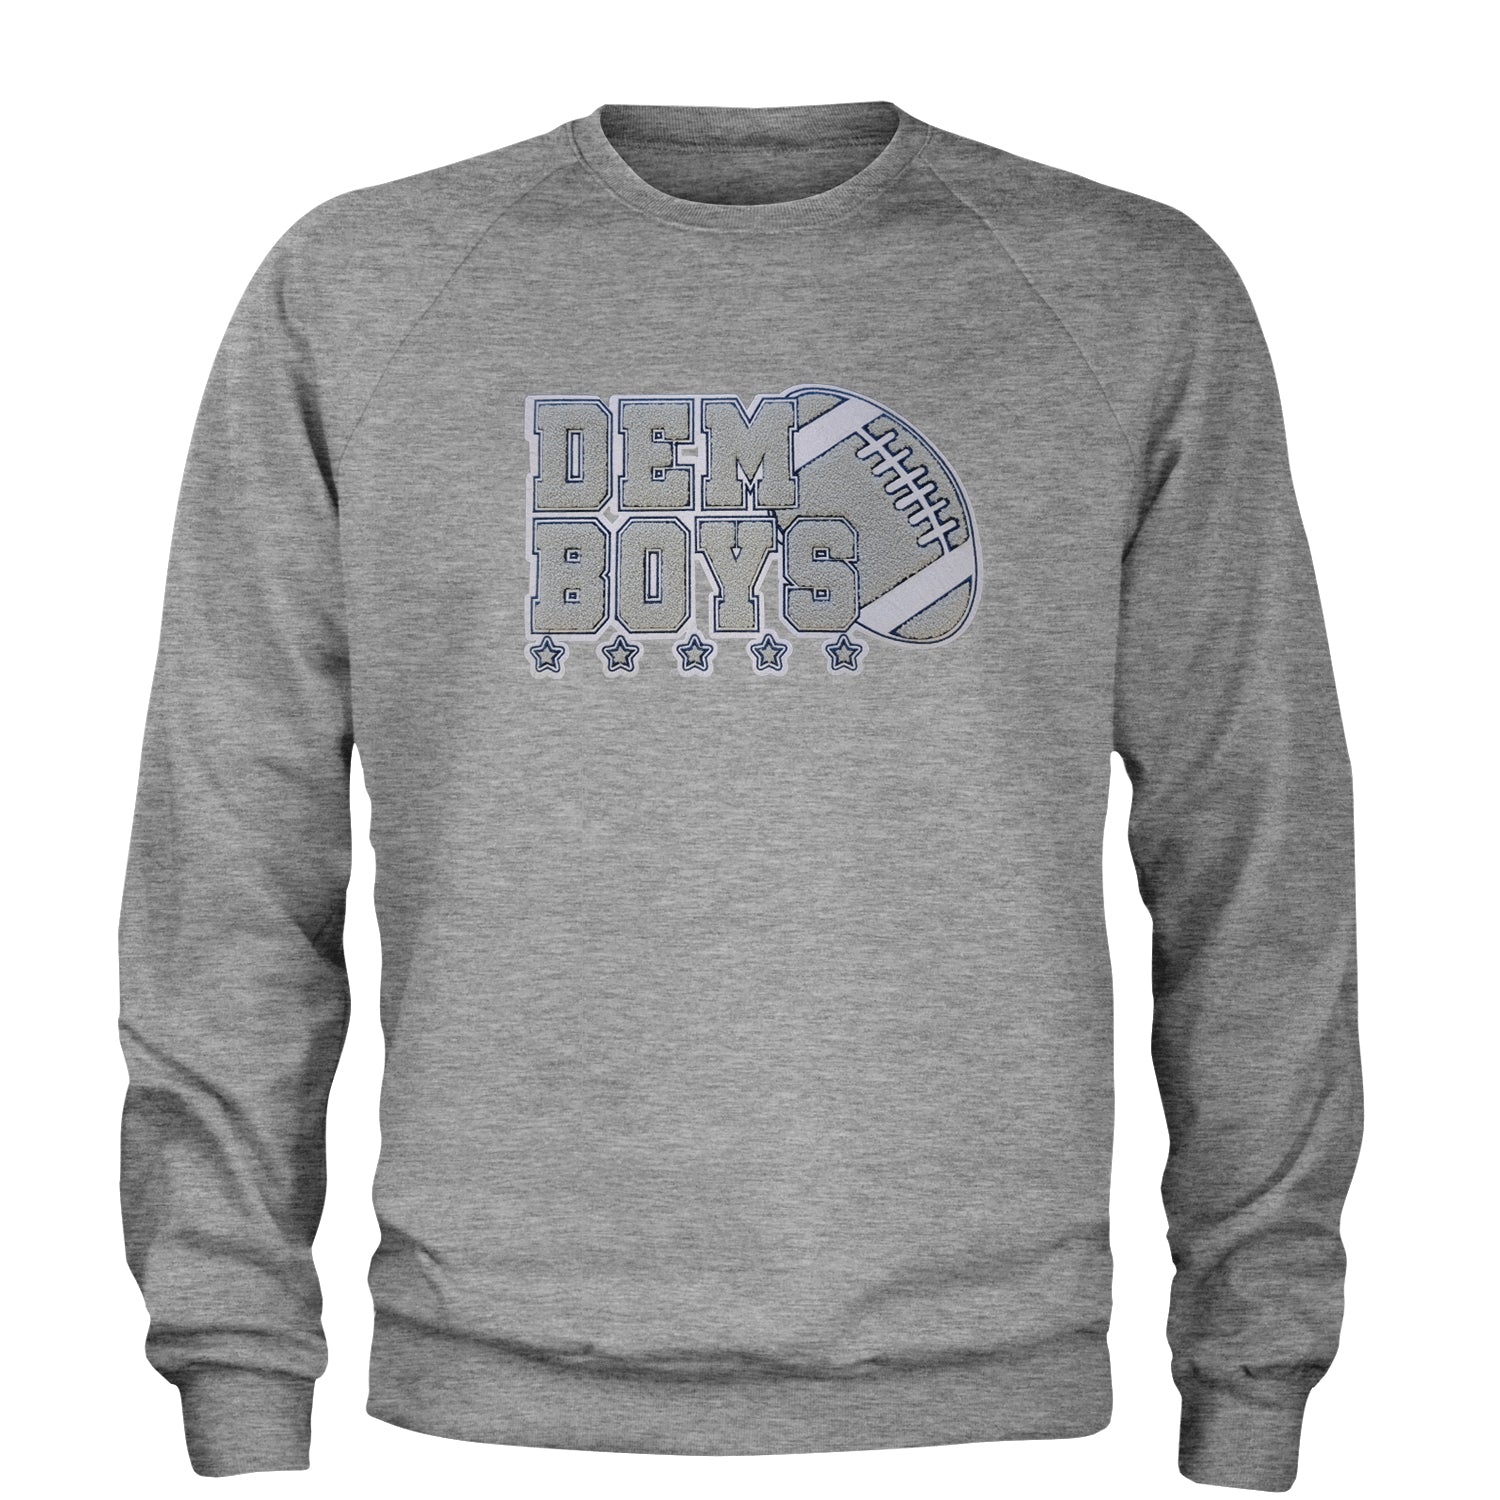 Dem Boys Embroidered Patch 2 Adult Crewneck Sweatshirt dallas, fan, jersey, team, texas by Expression Tees